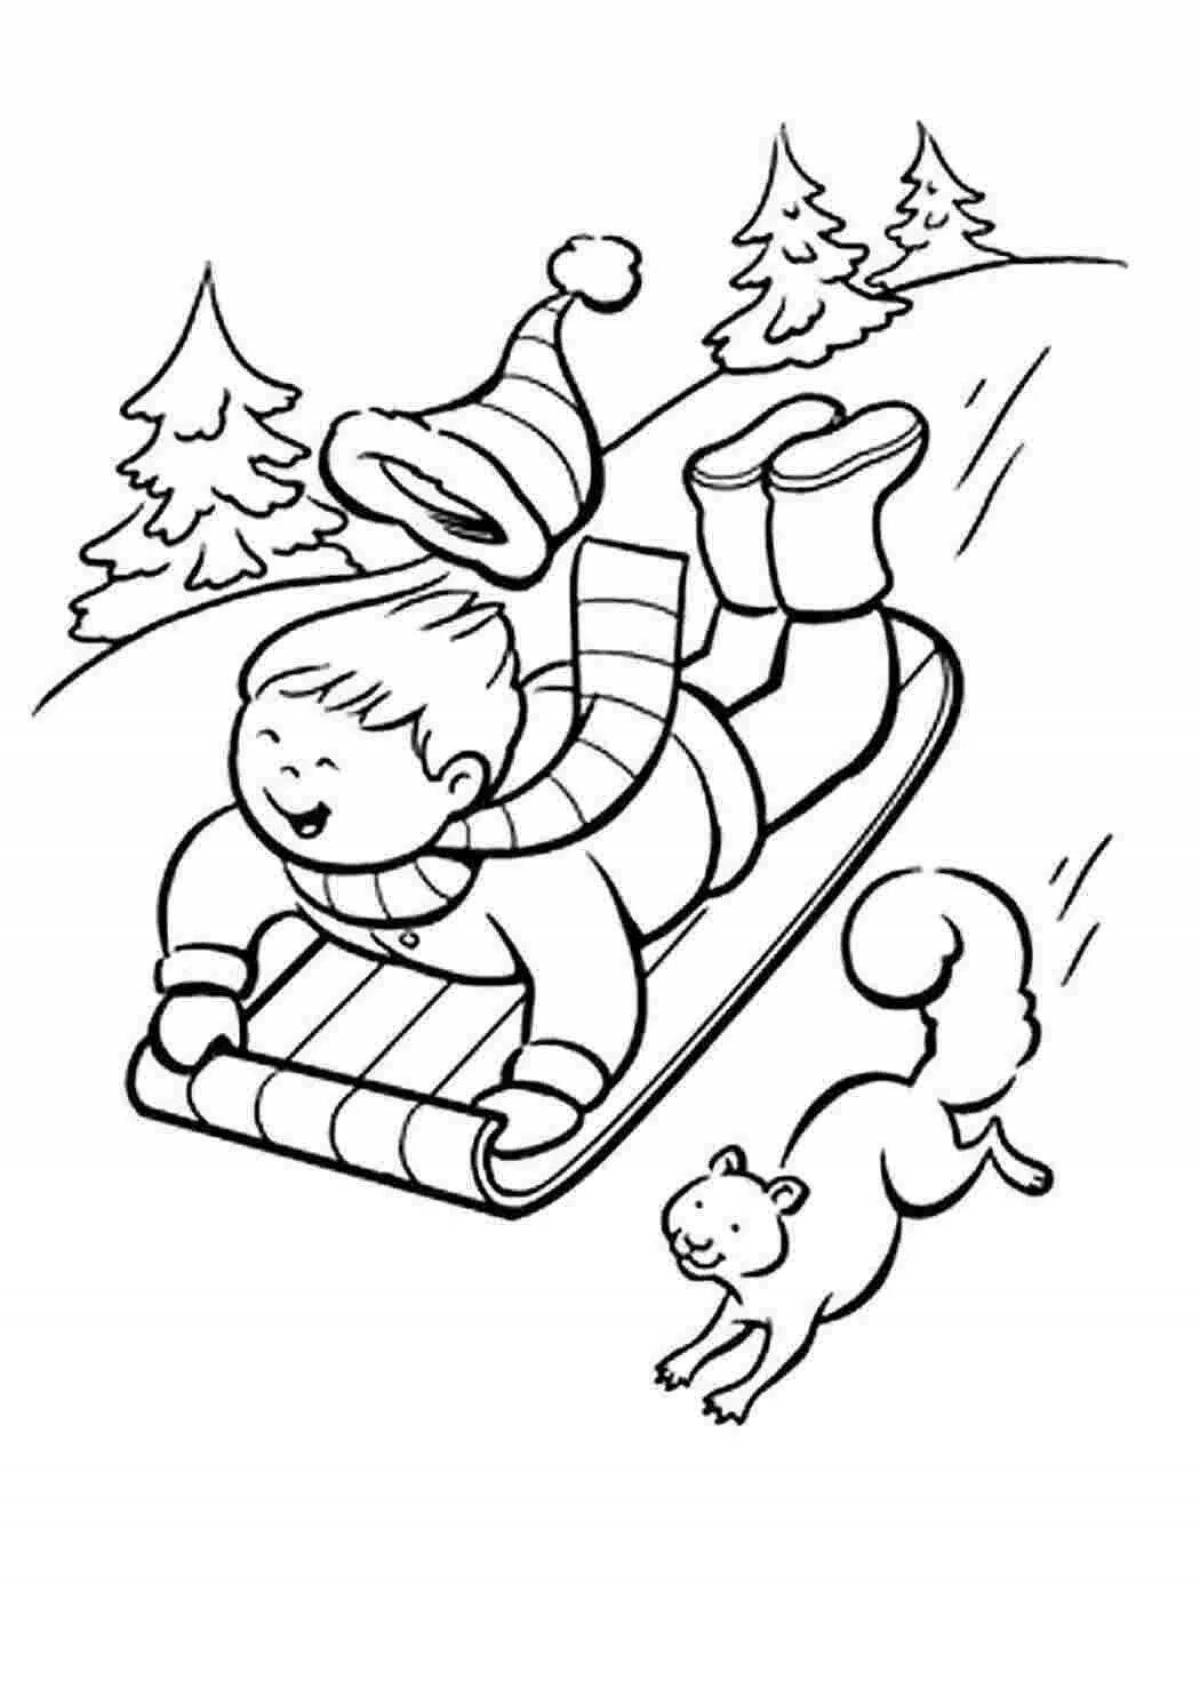 Amazing sleigh coloring book for kids